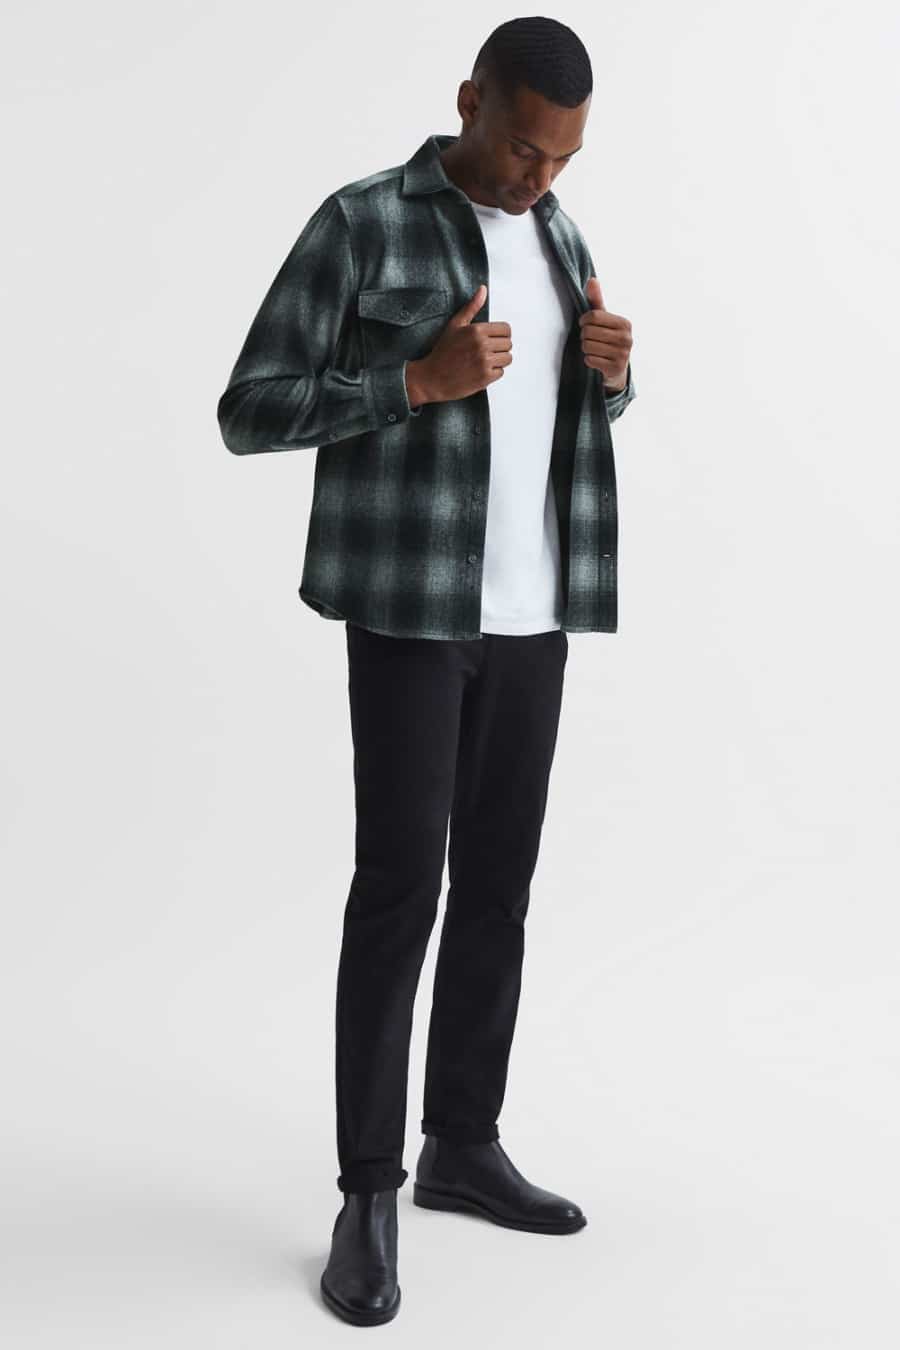 Men's black jeans, white T-shirt, check flannel shirt and black Chelsea boots outfit